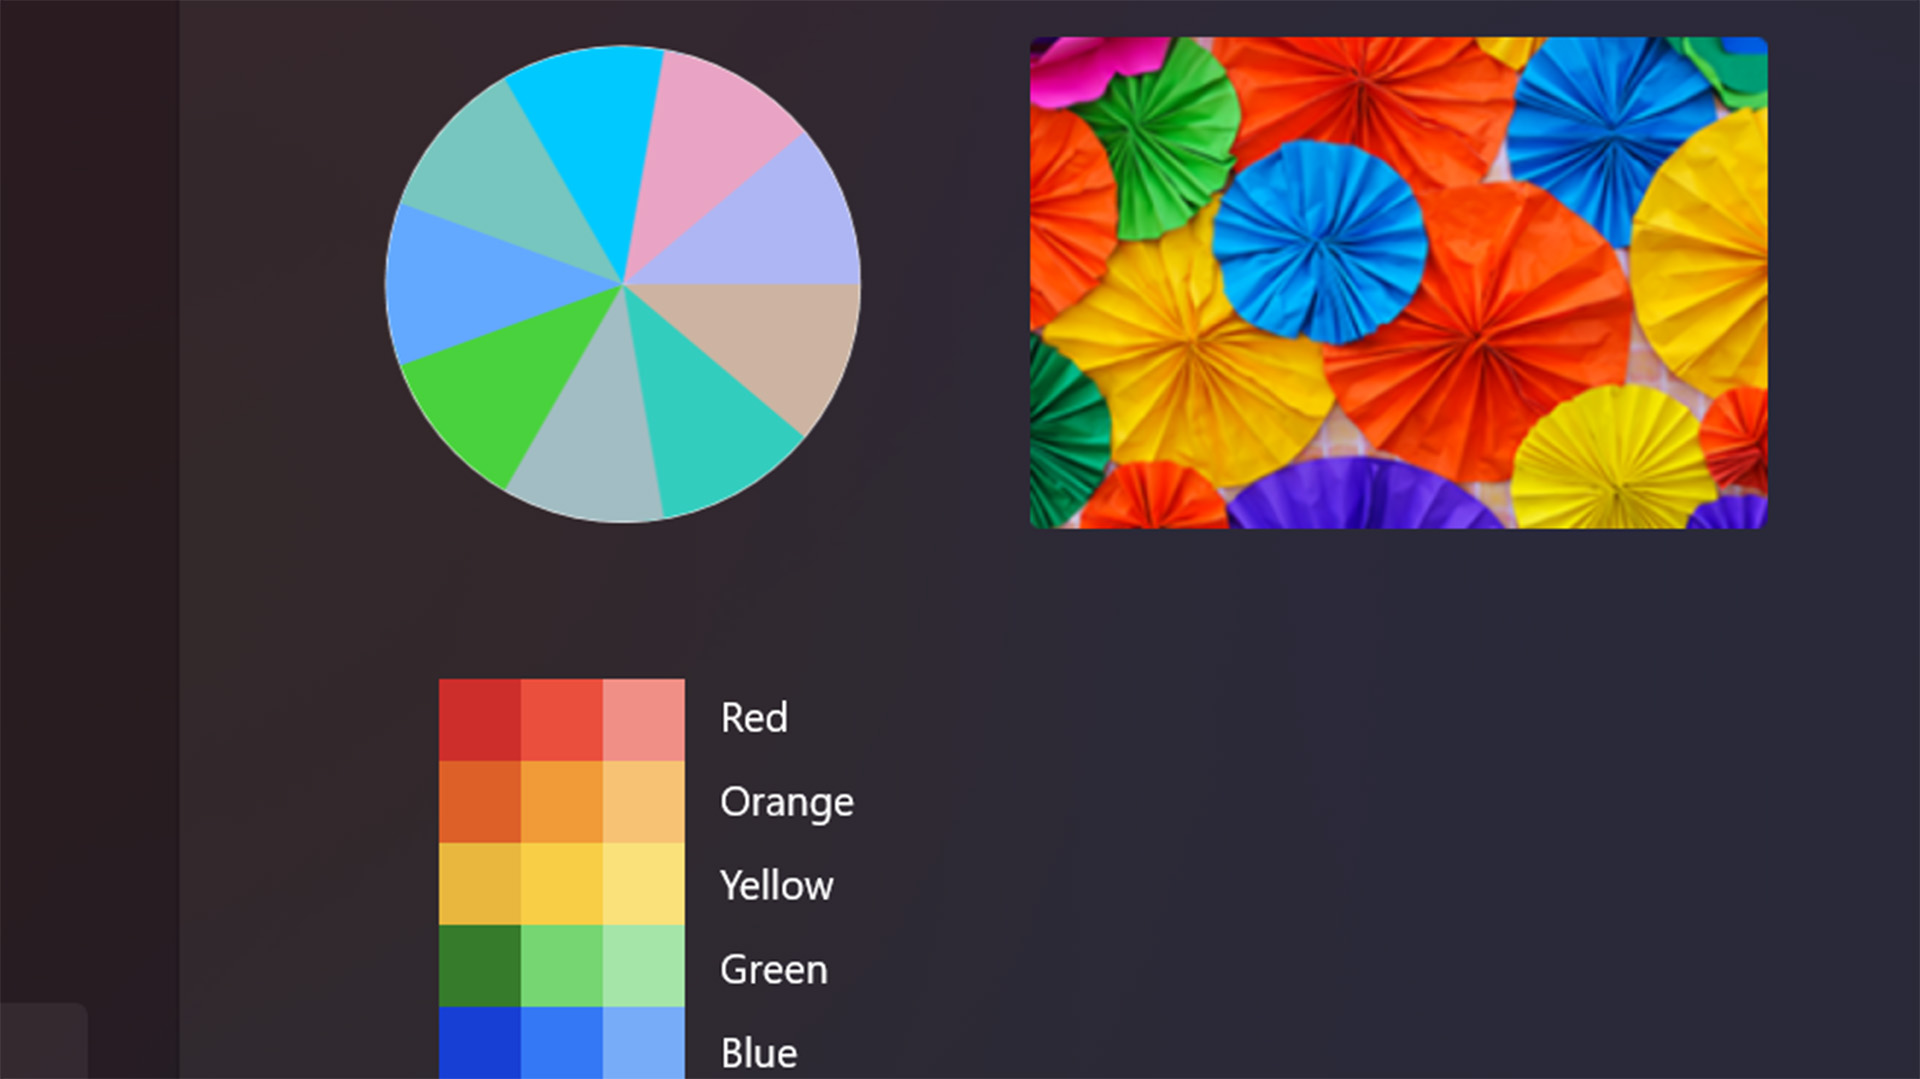  Windows 11's color blindness filters no longer add latency or hurt performance in games 